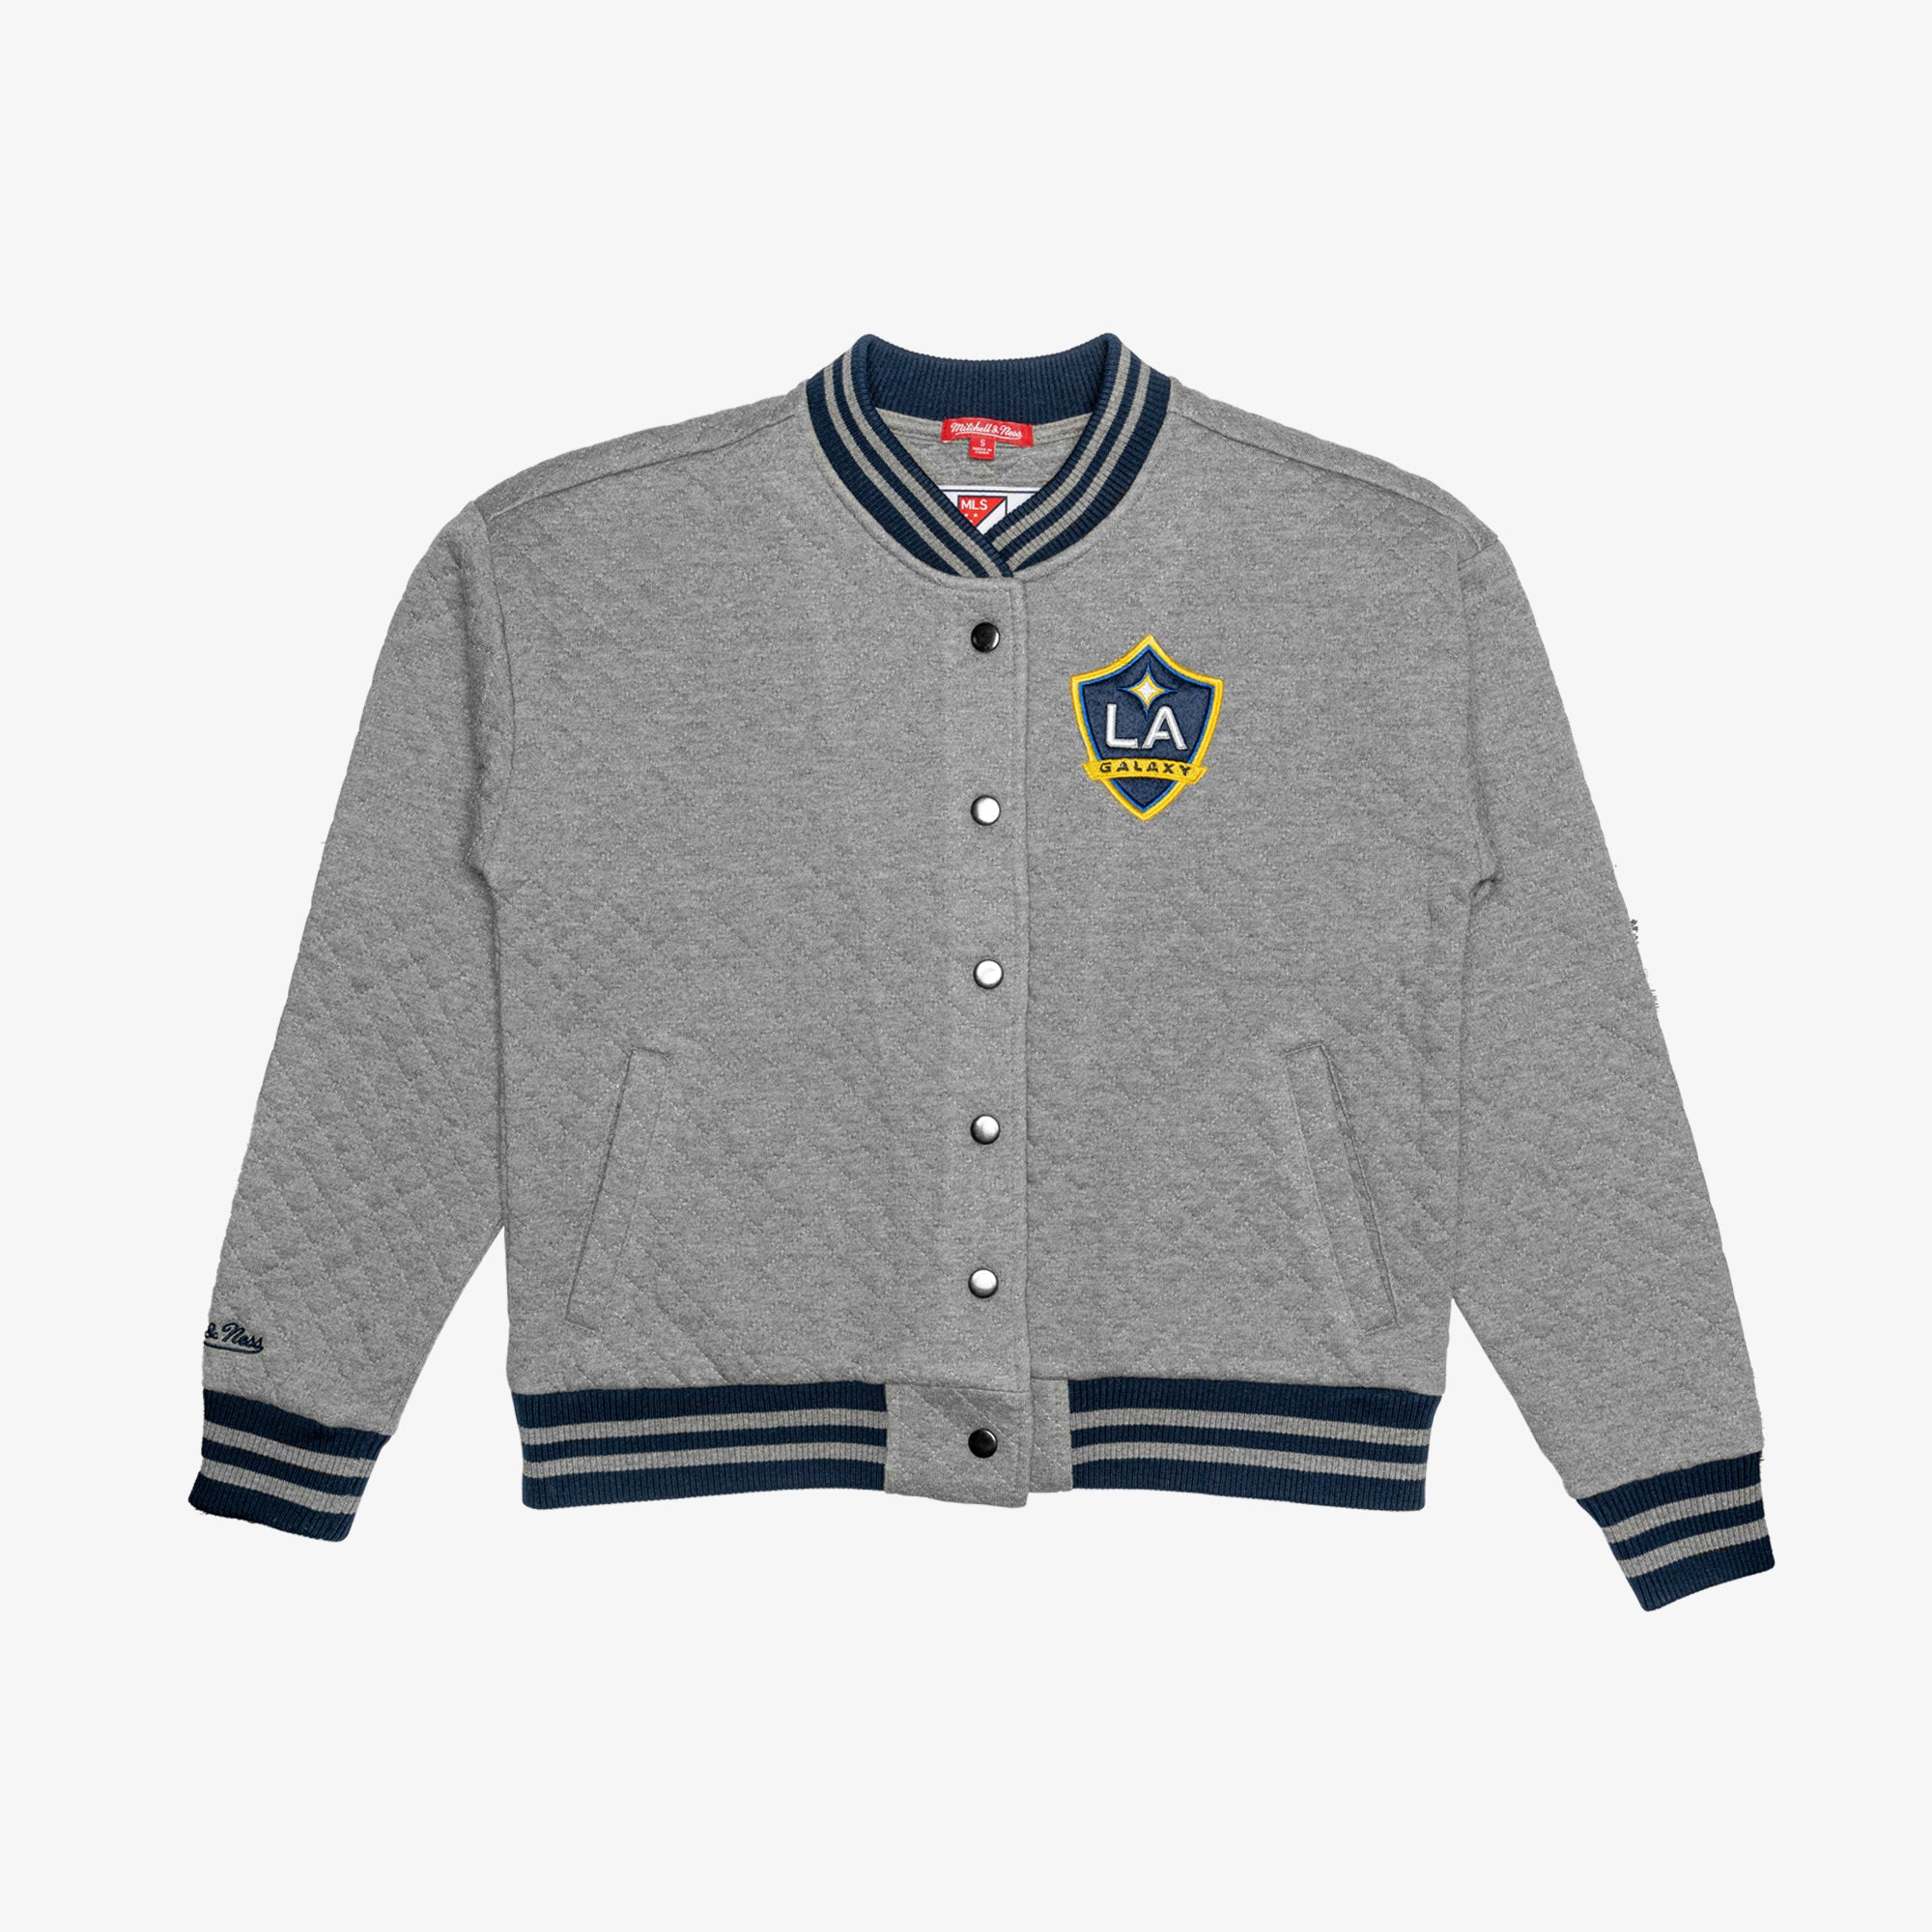 LA Galaxy Quilted Jacket - Women's